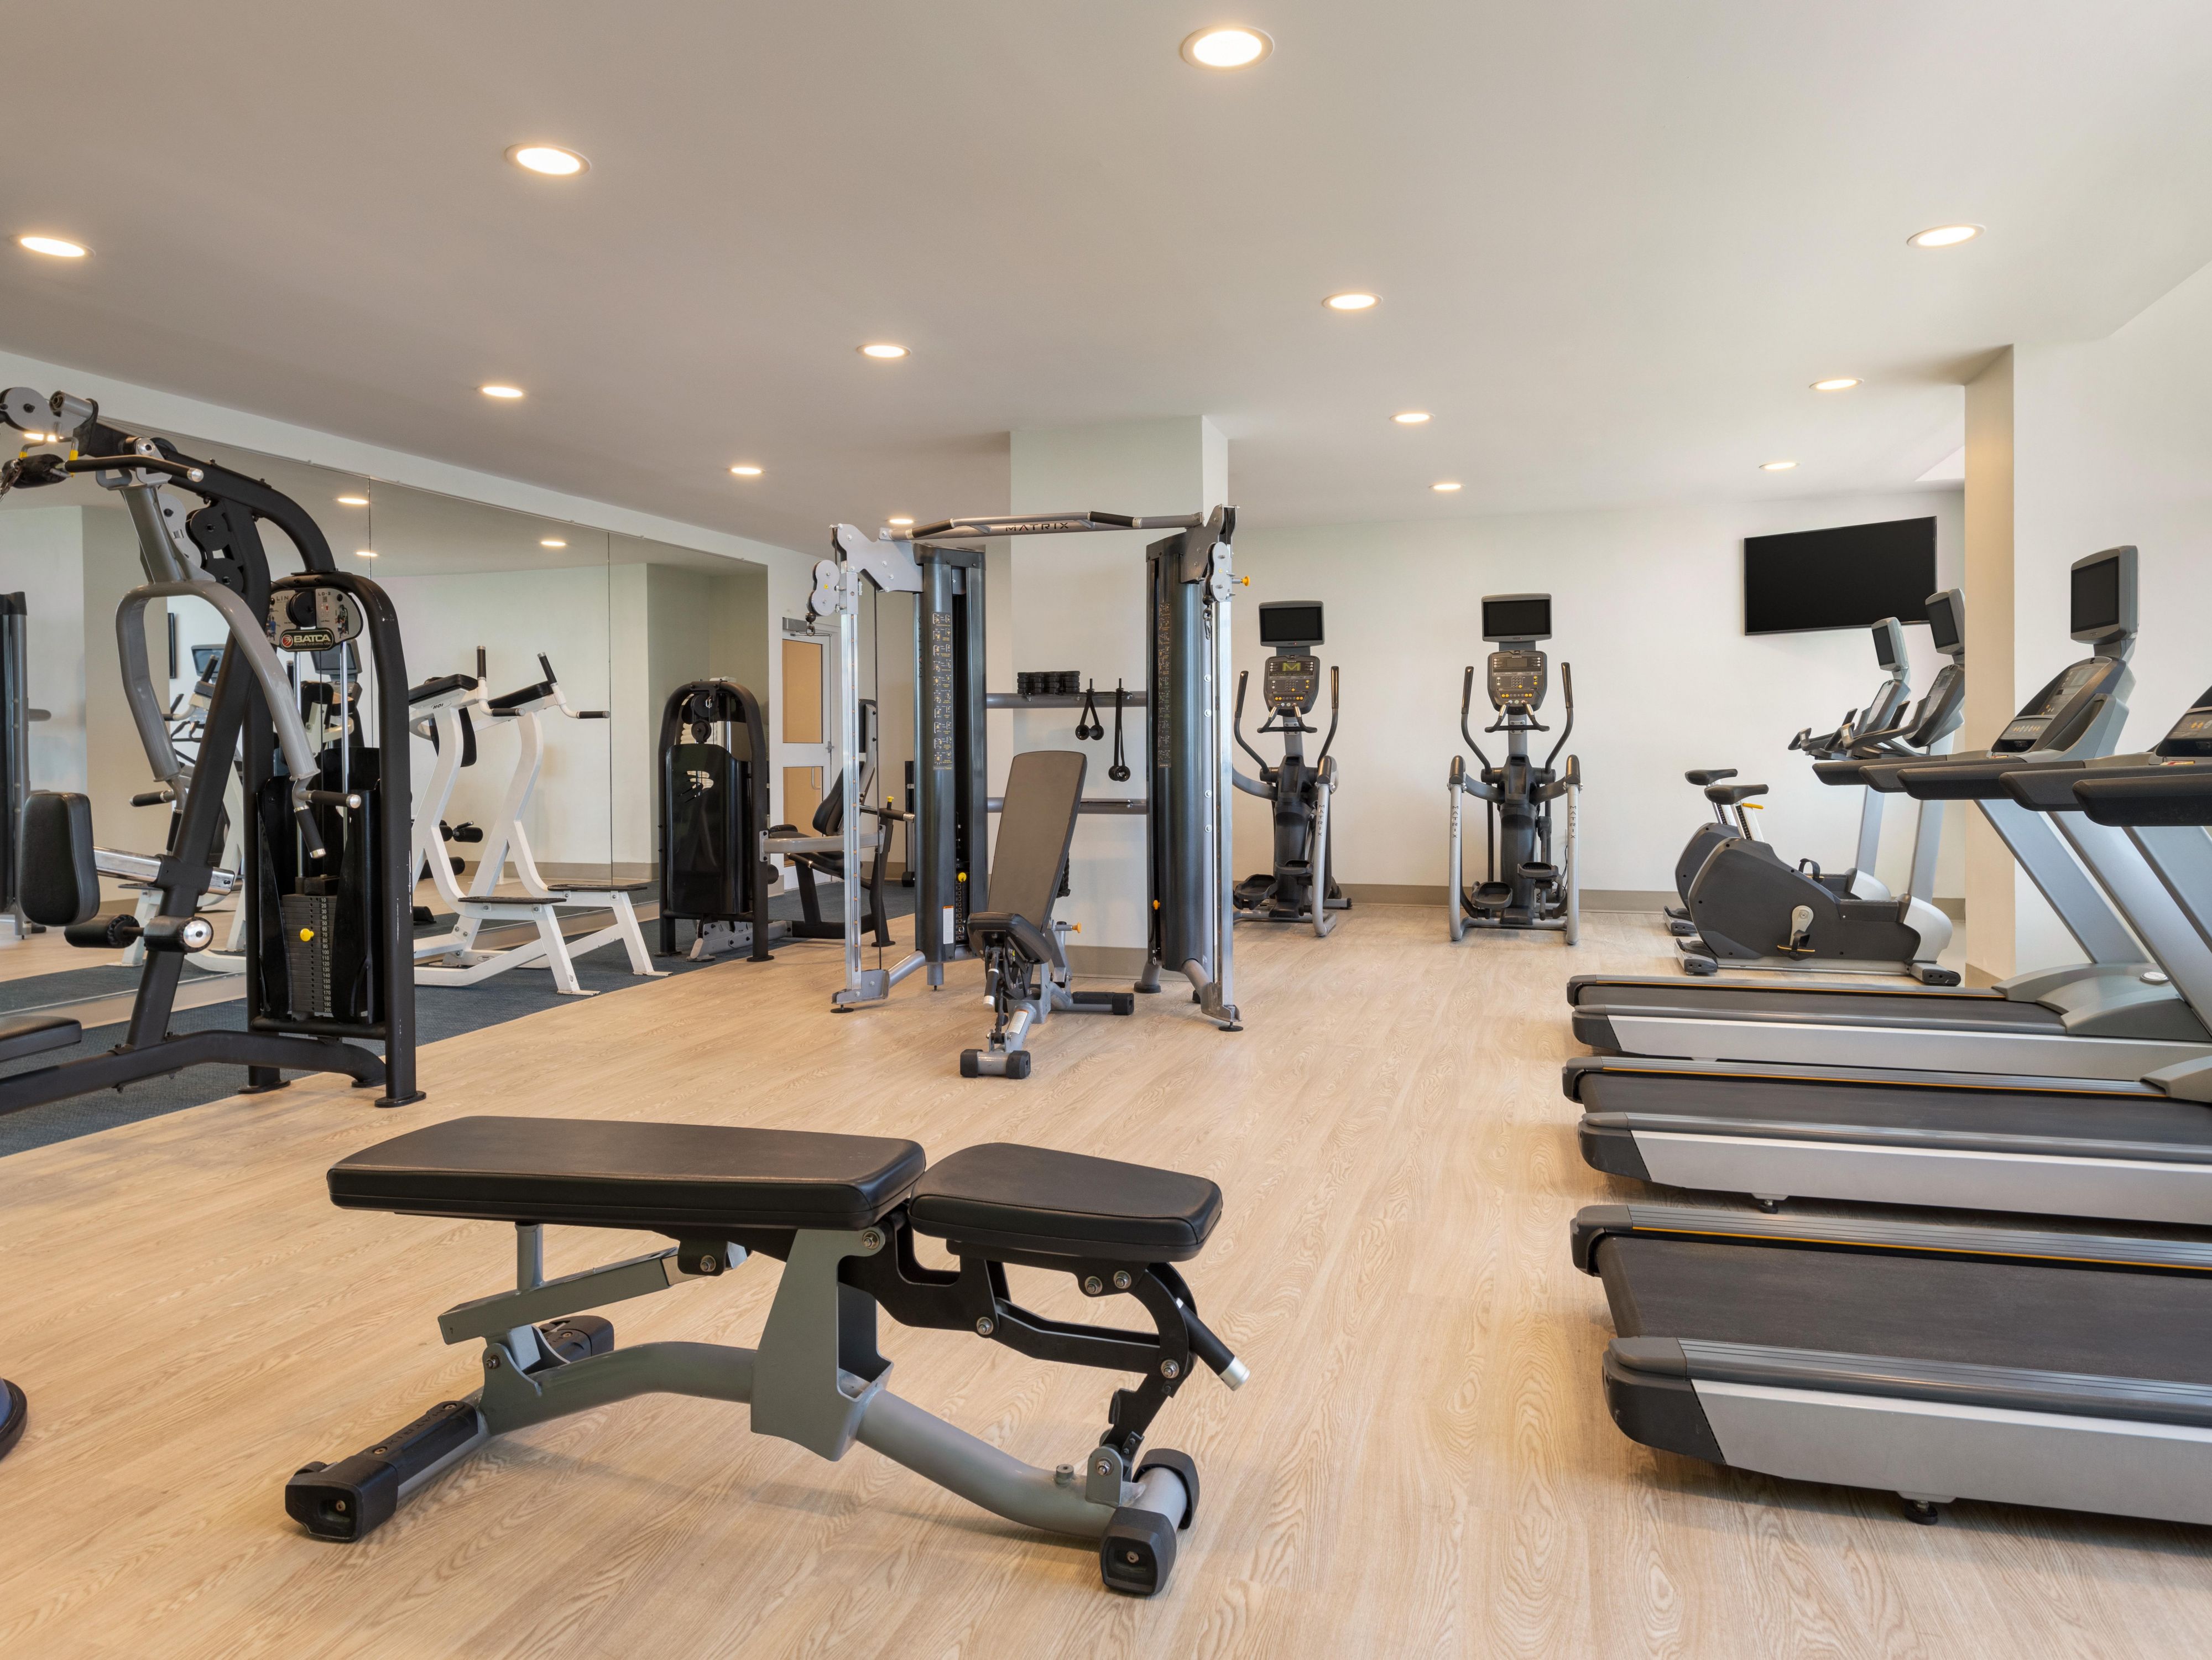 Whether you're here to relax and rejuvenate, or here on business, you can get a vigorous workout in our Fitness Facility. 